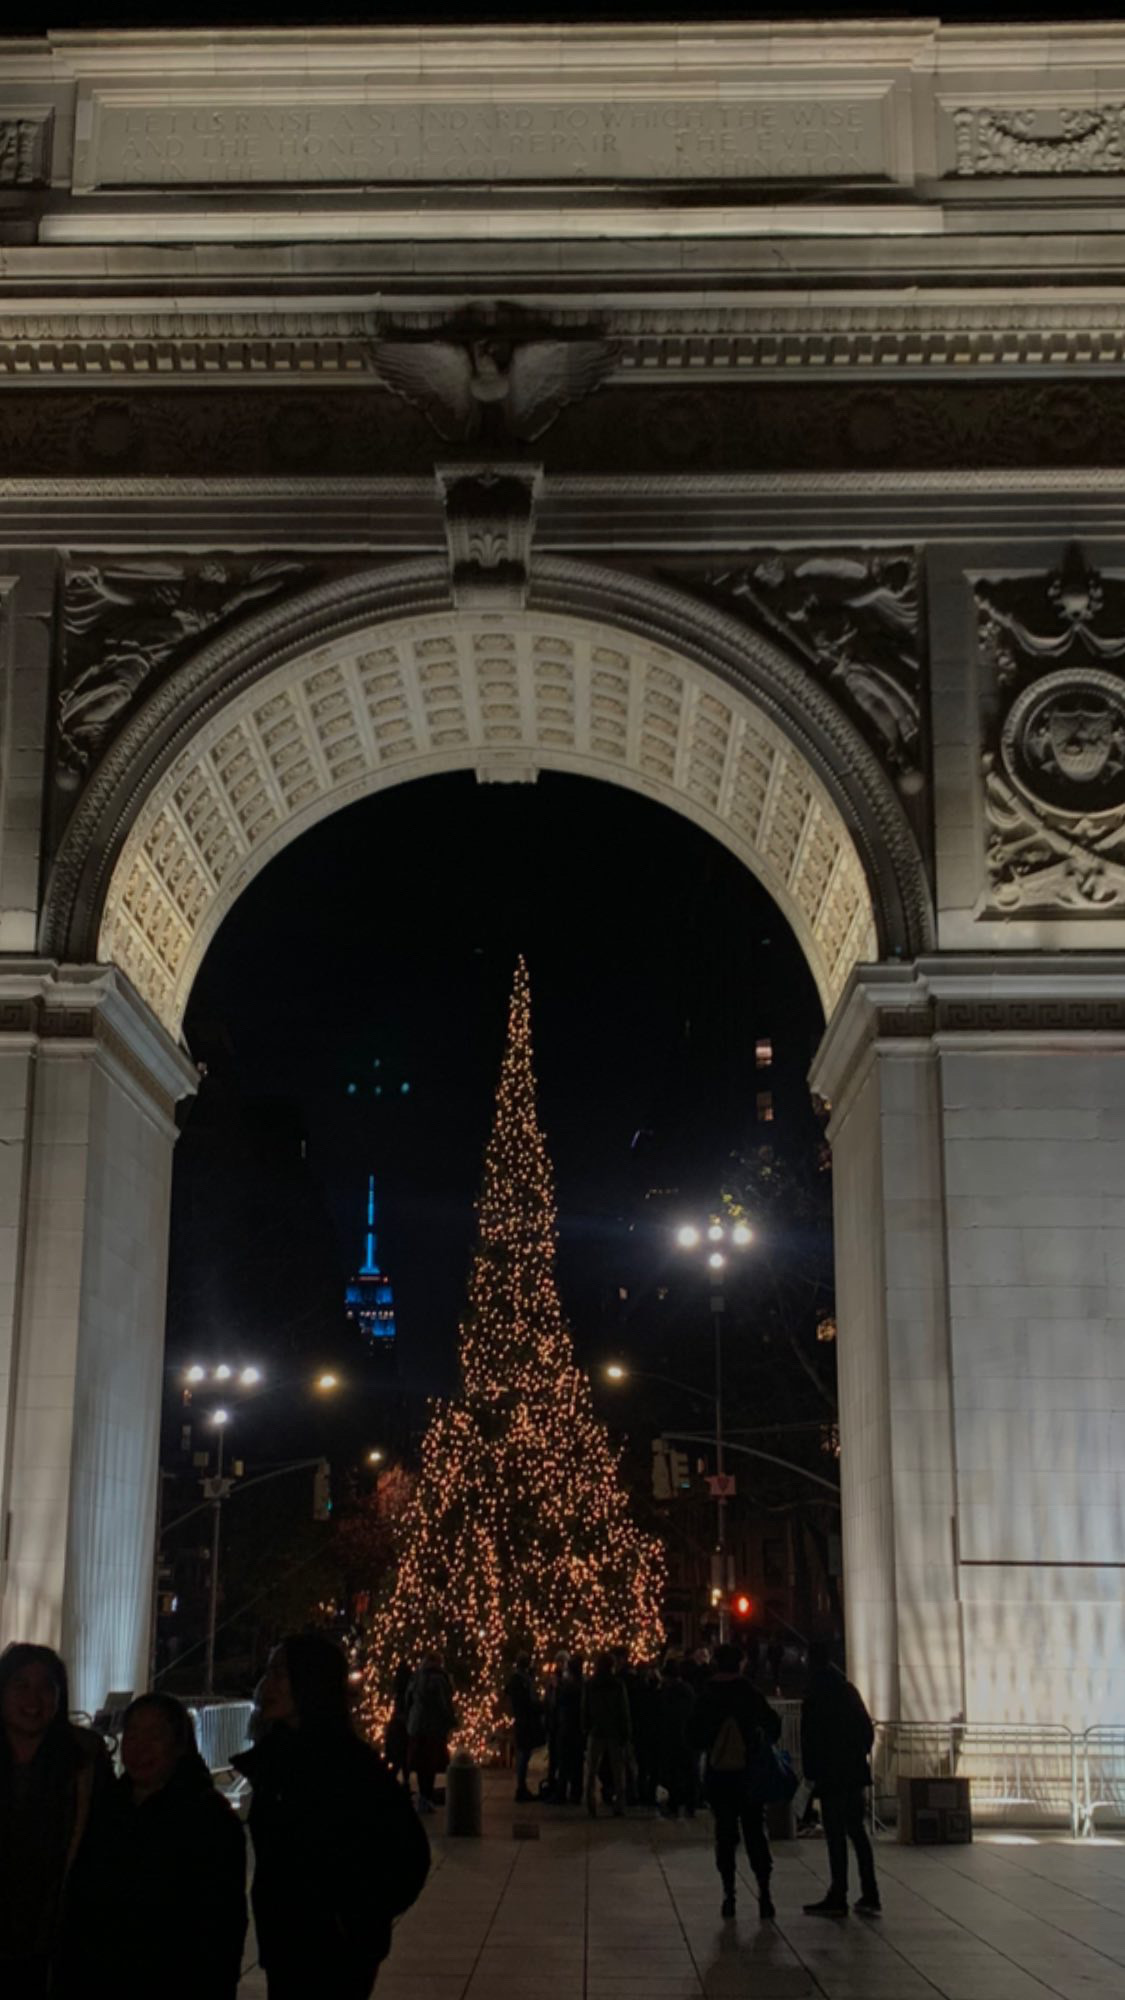 The Washington Square Arch at night with a view of the Empire State Building and a Christmas trees decorated in lights for the winter season.